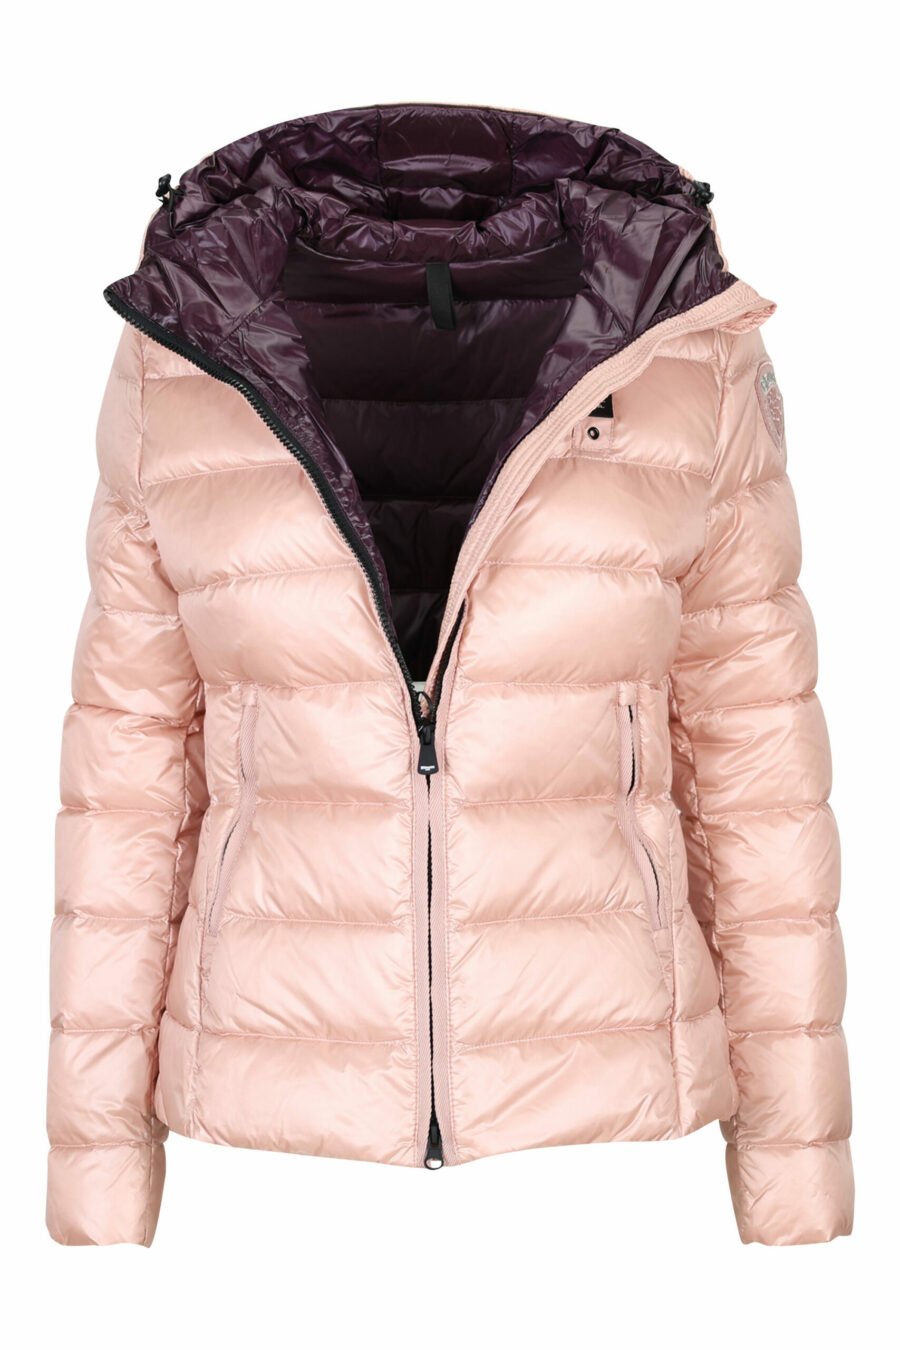 Pale pink hooded jacket with straight lines with purple inside and logo patch - 8058610673321 1 scaled